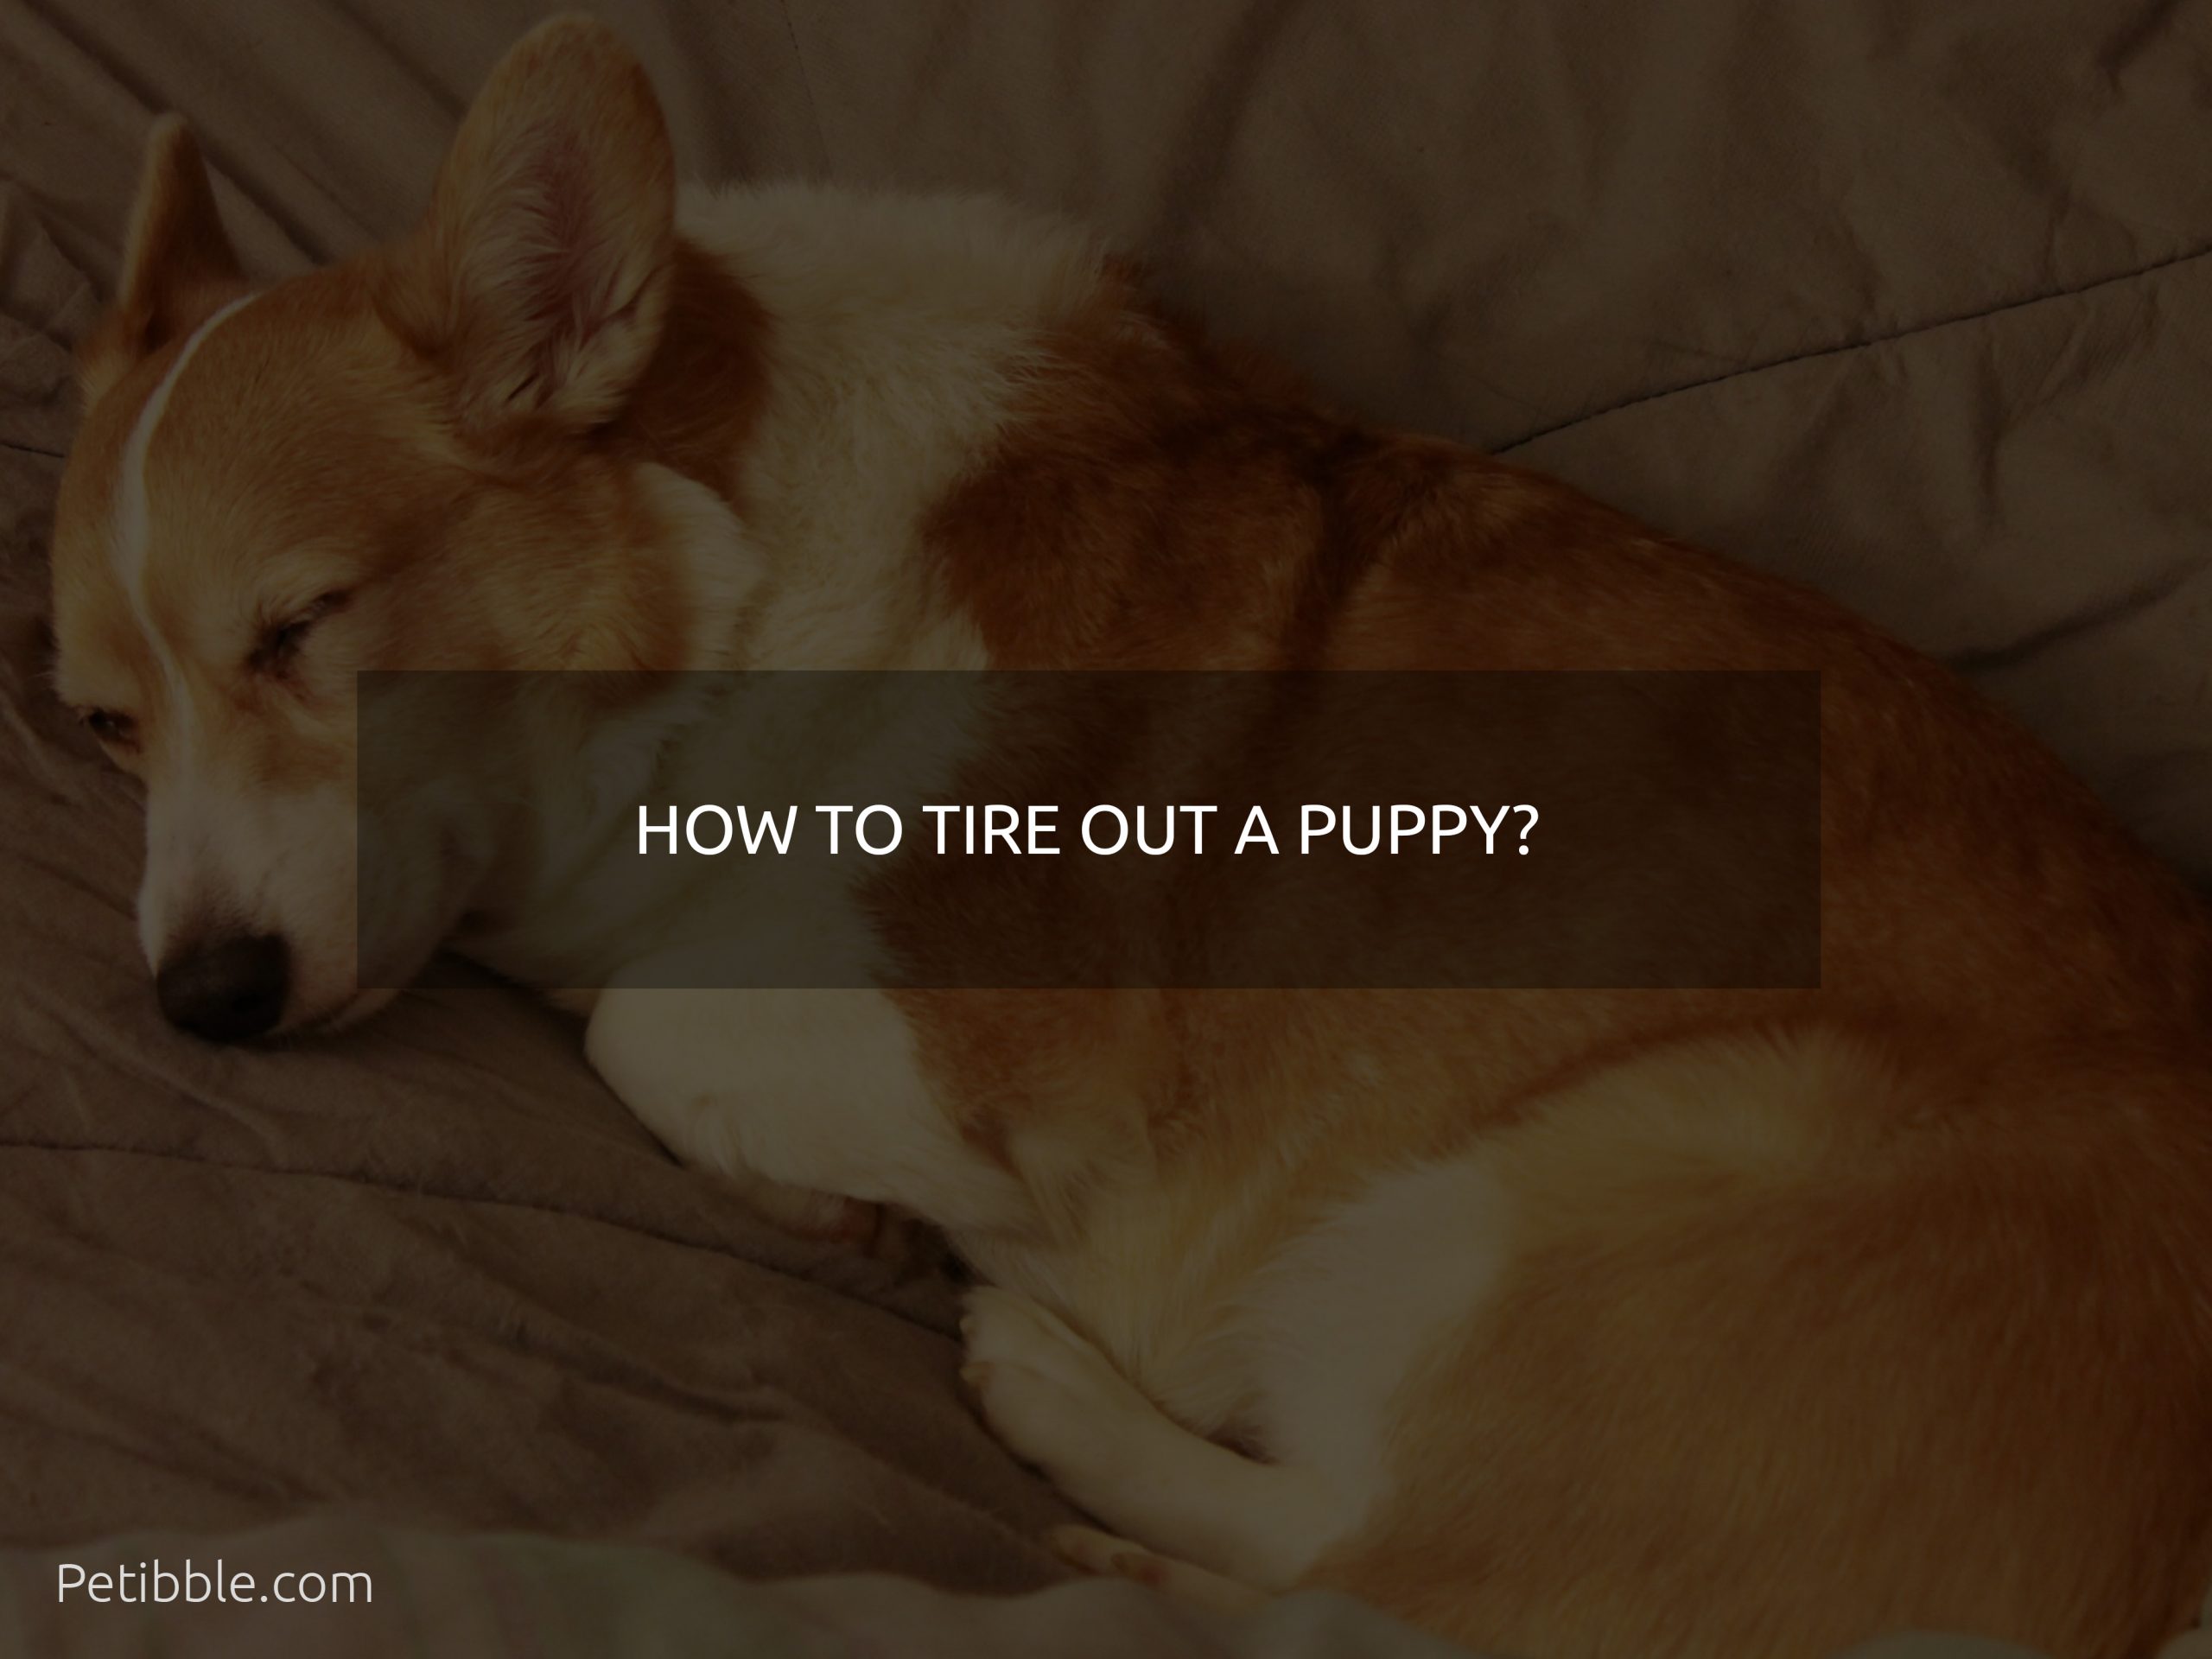 how to tire out a puppy?